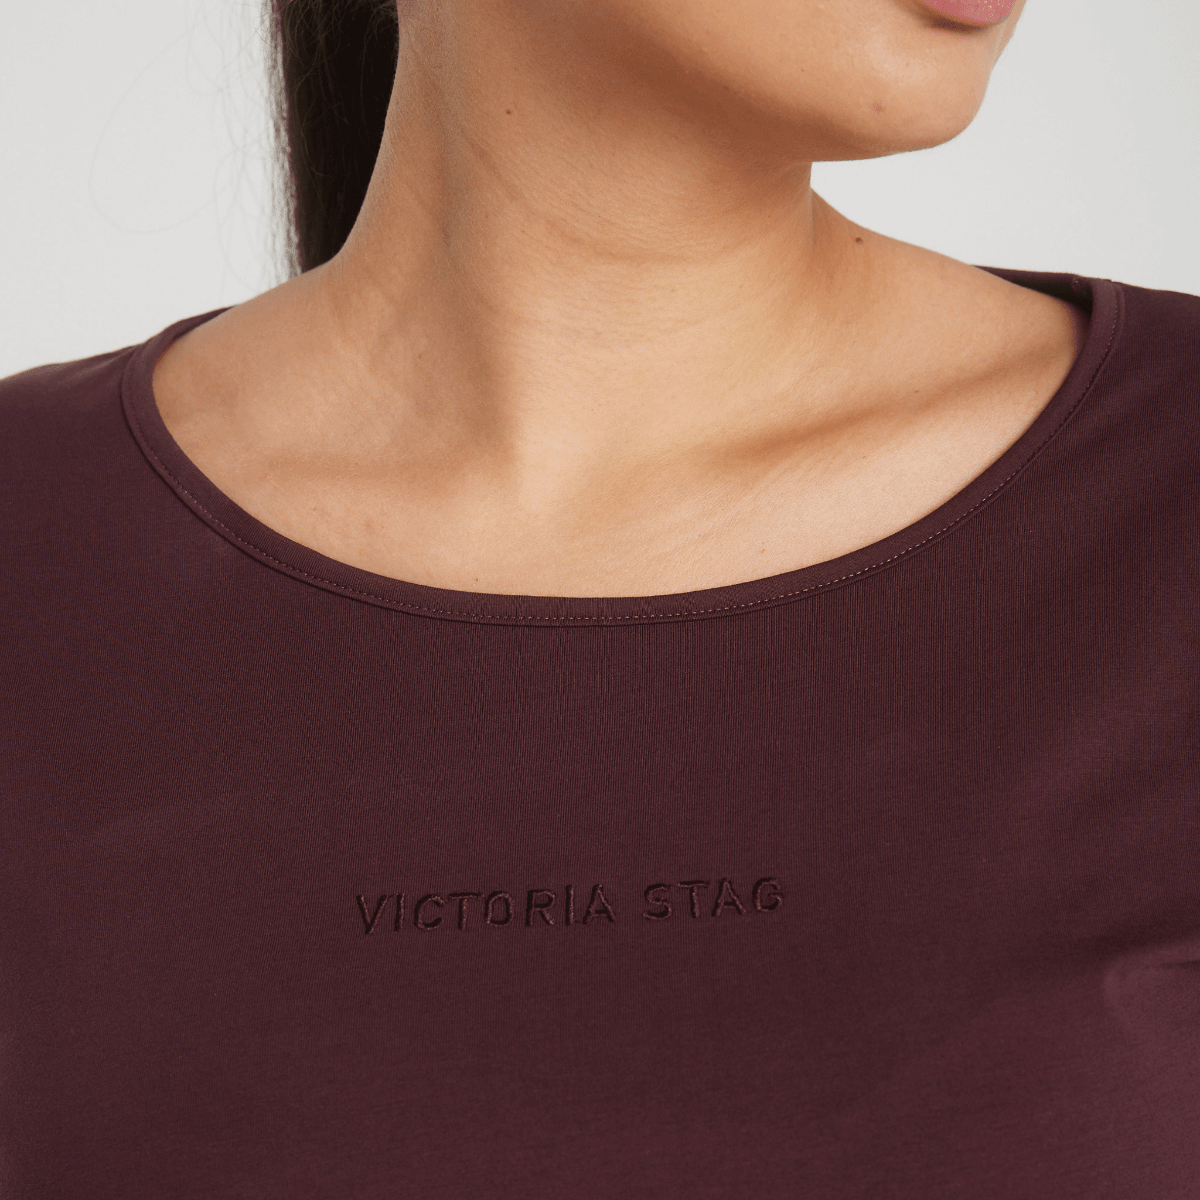 Victoria Stag's Core Cap Sleeved Tee in Ox Blood front closer  look